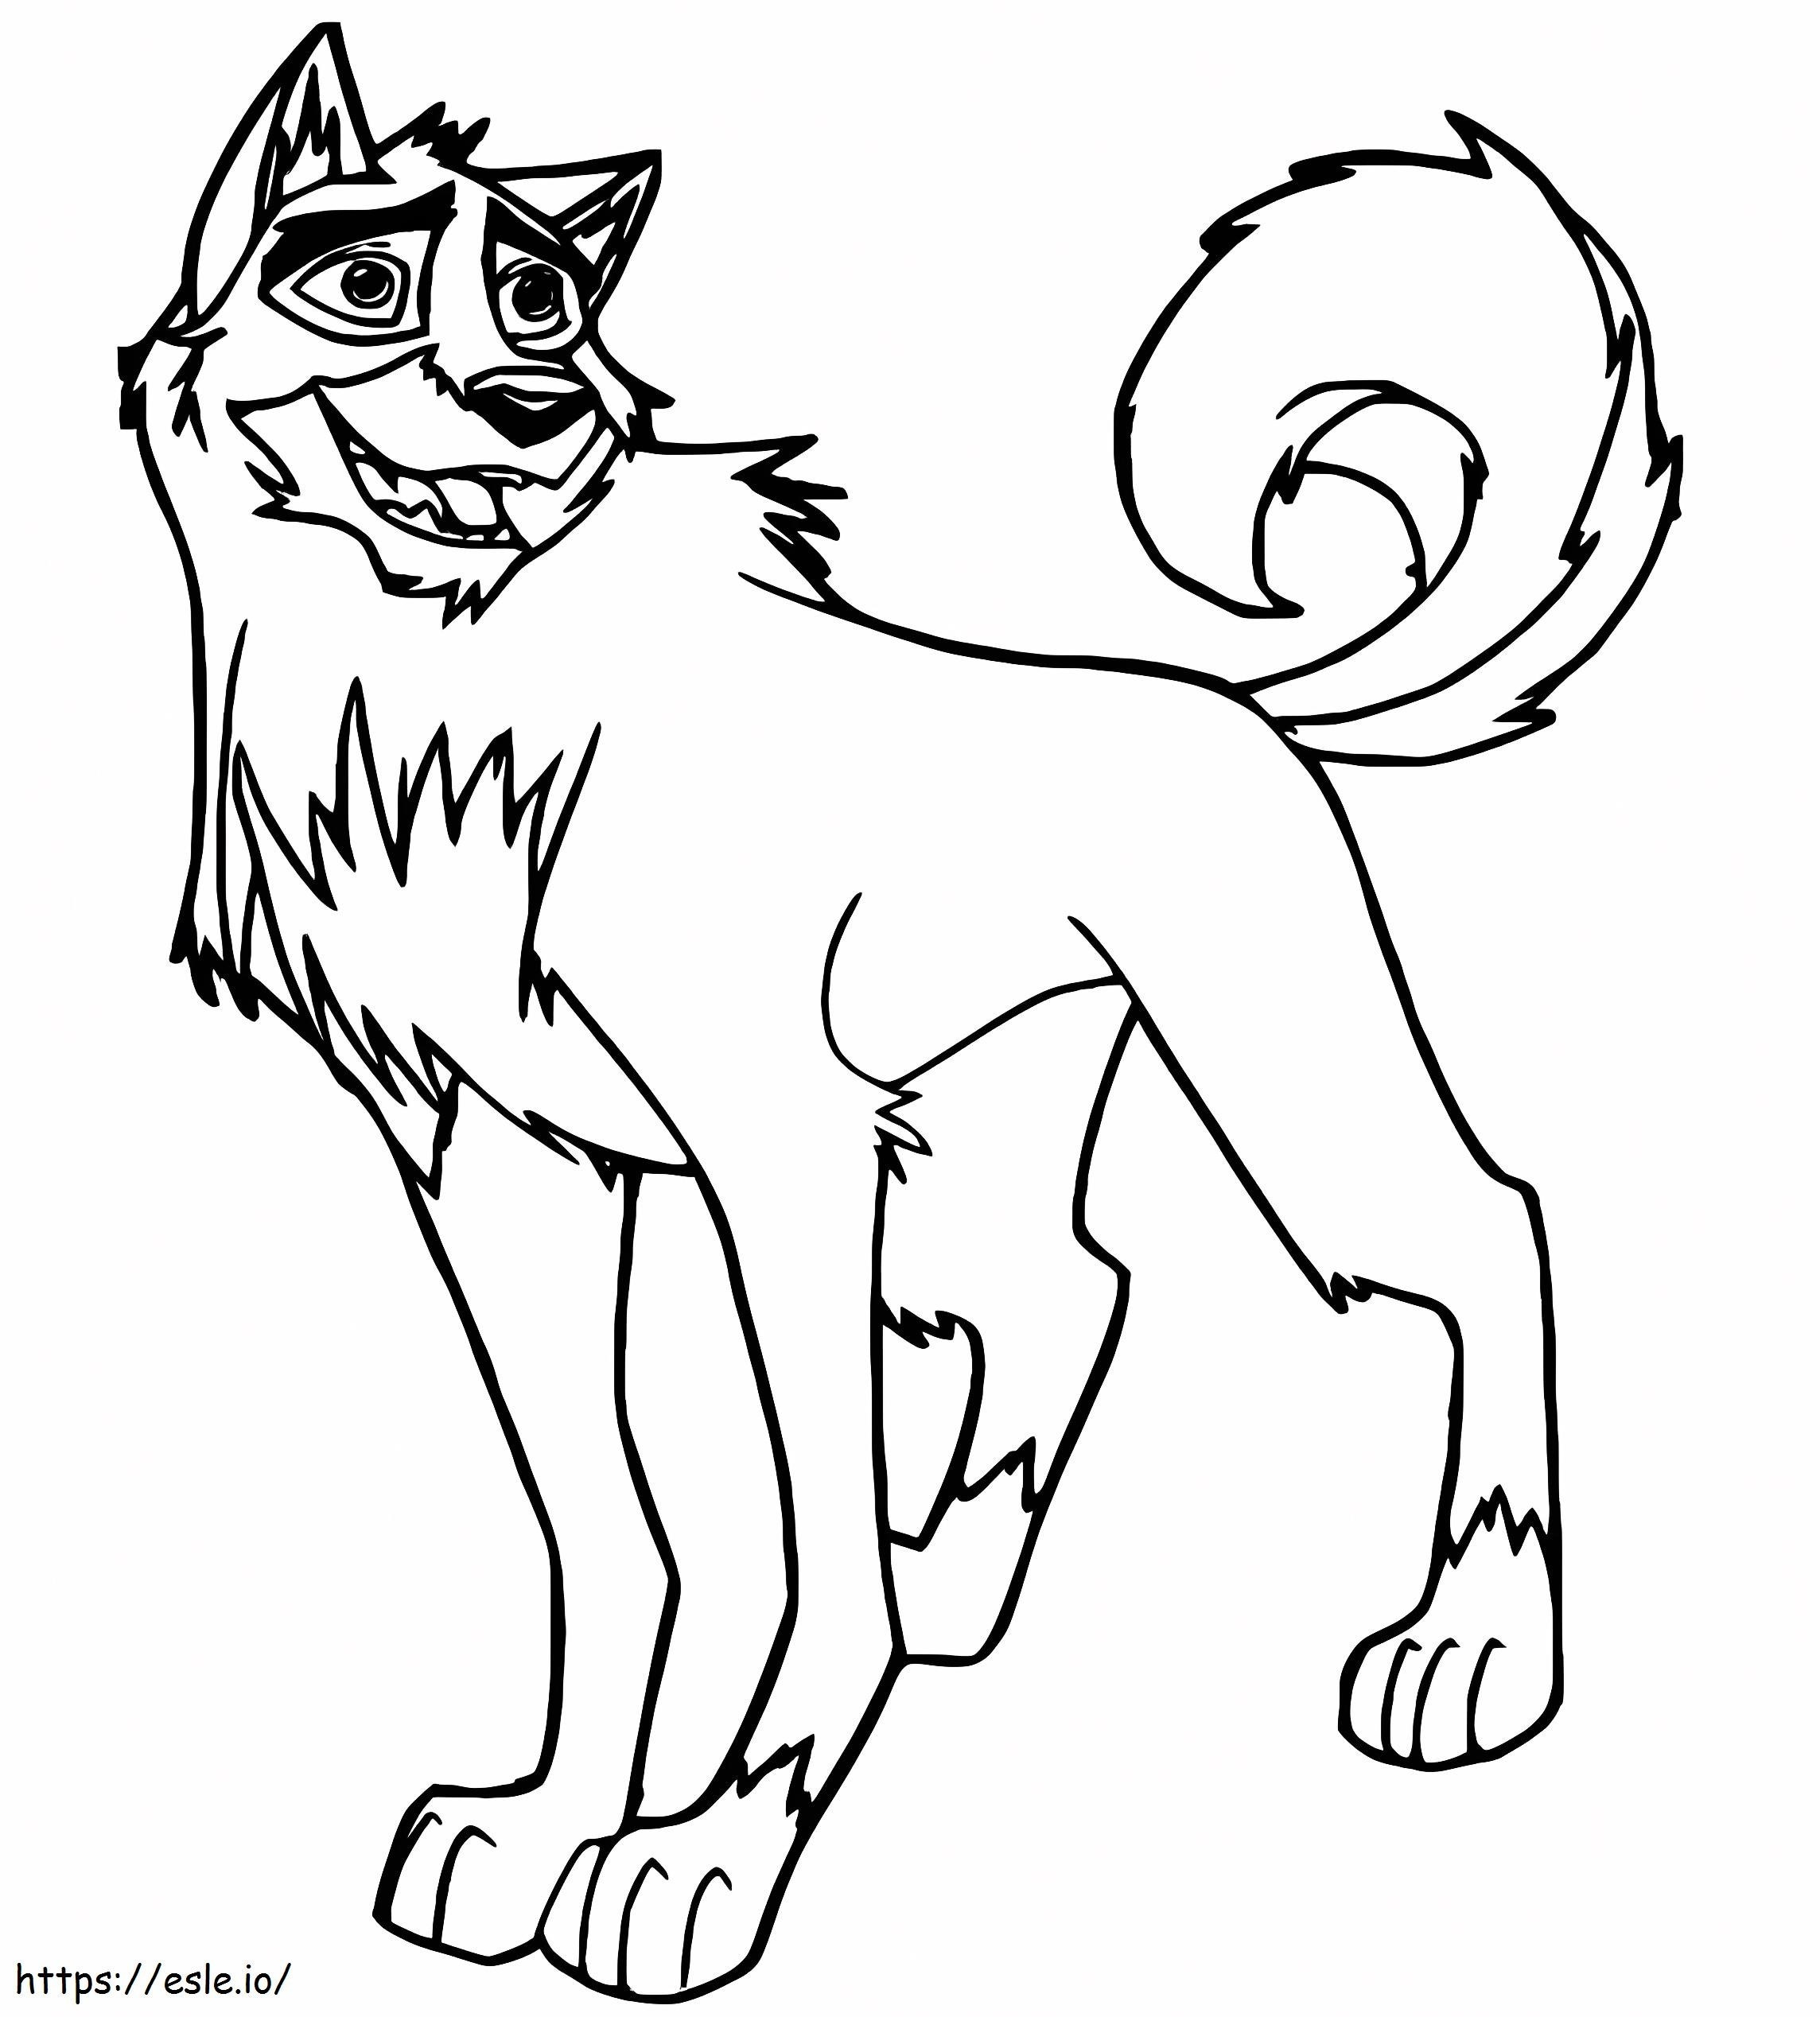 Balto Is Smiling coloring page